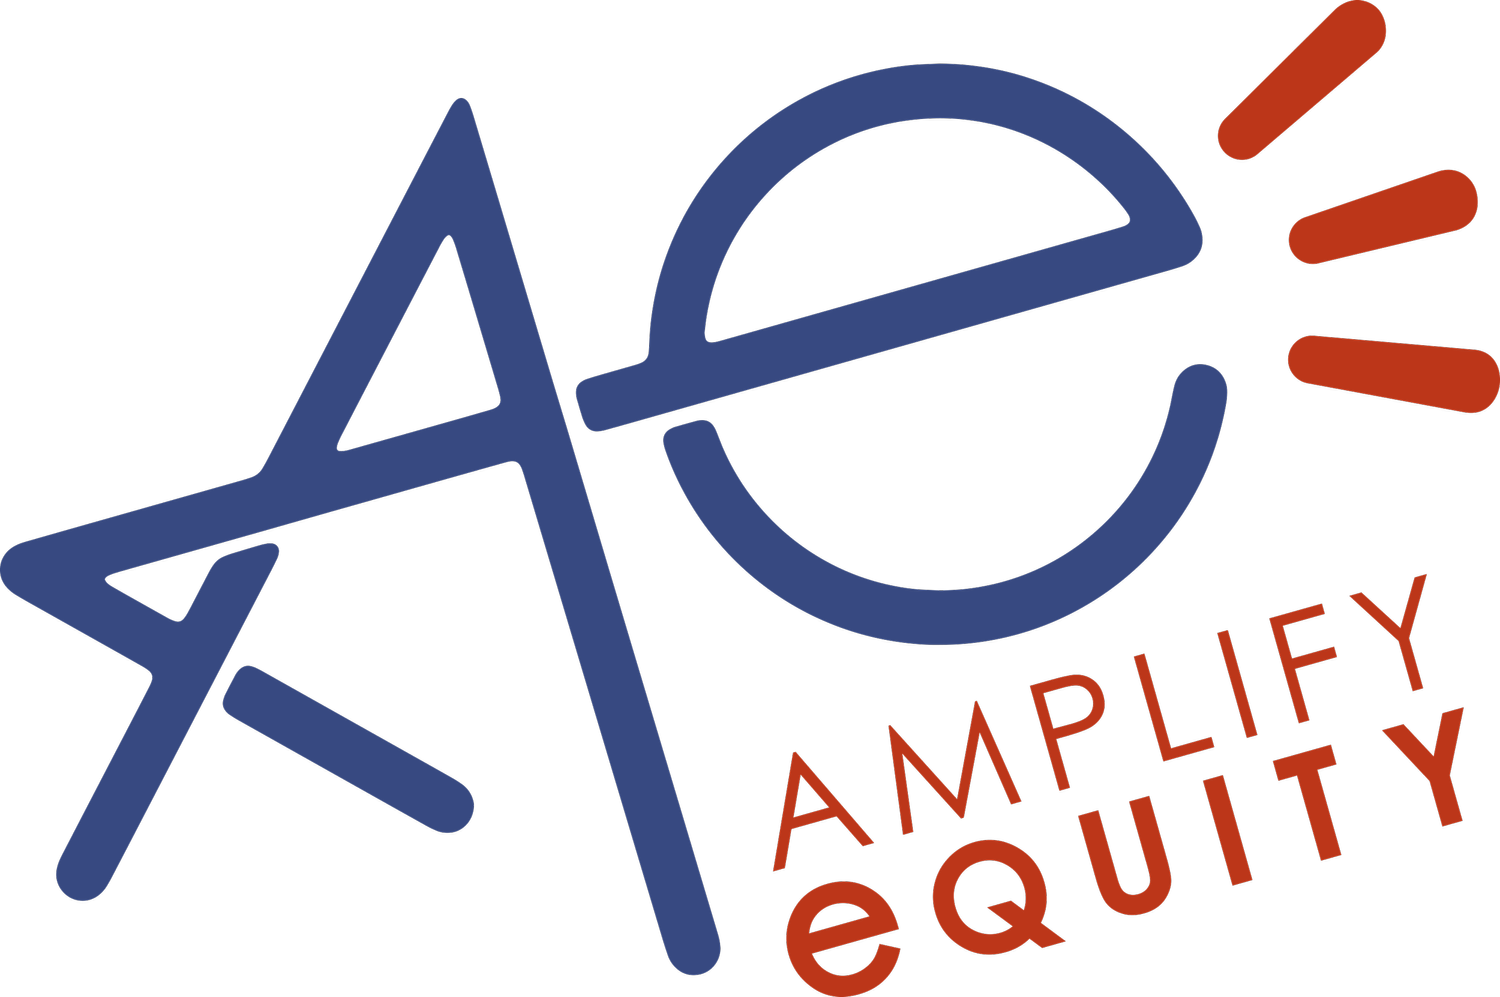 Amplify Equity